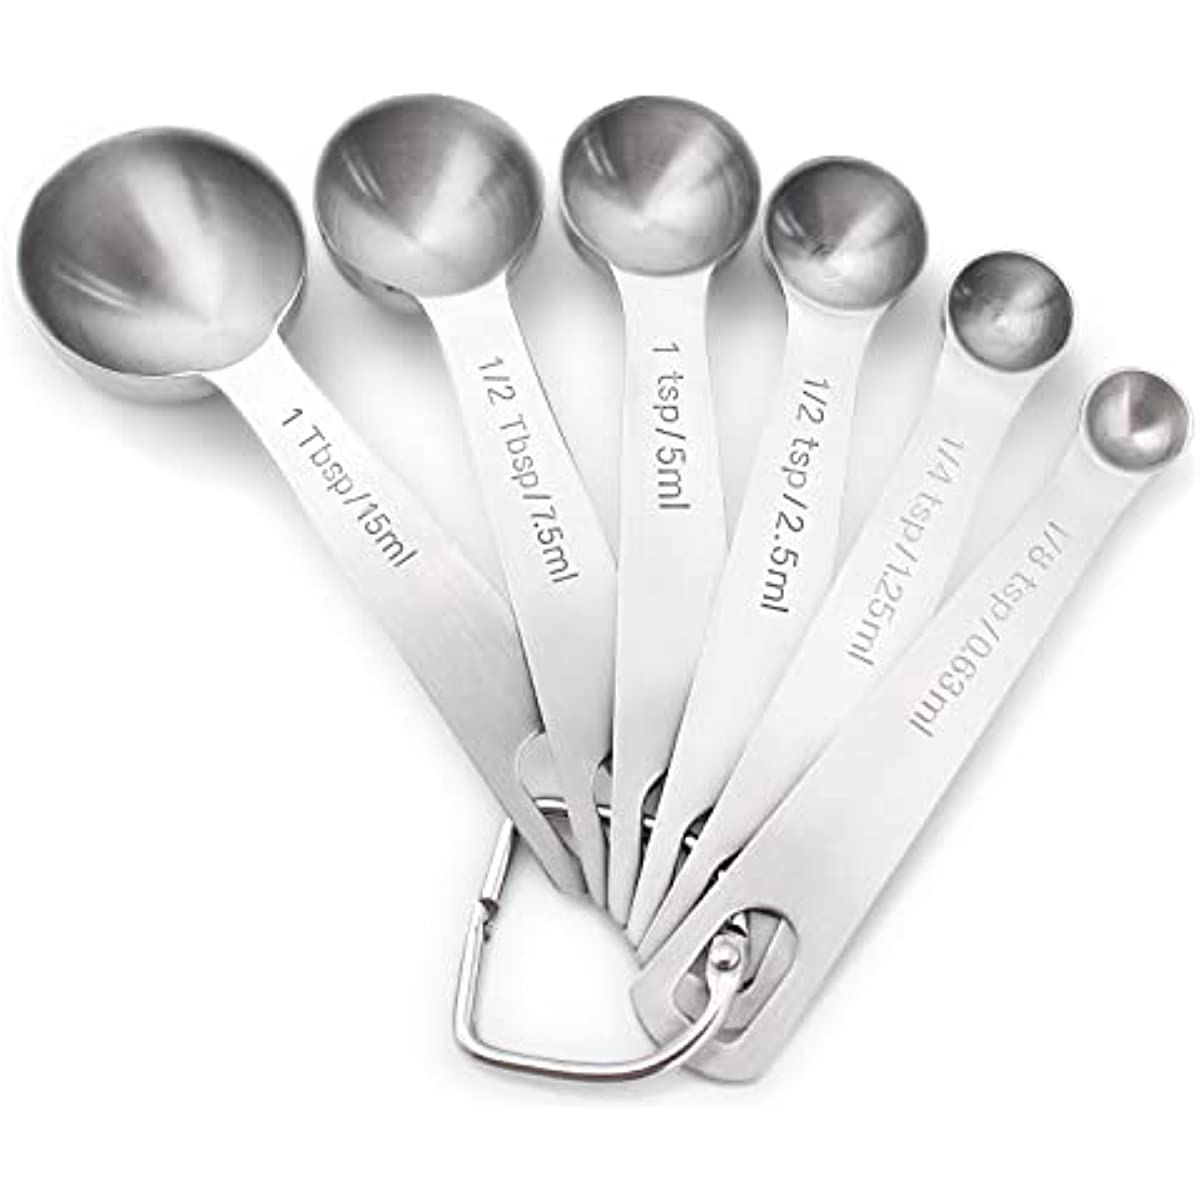 Set of 6 Measuring Spoons Premium Heavy Duty Stainless Steel Cups